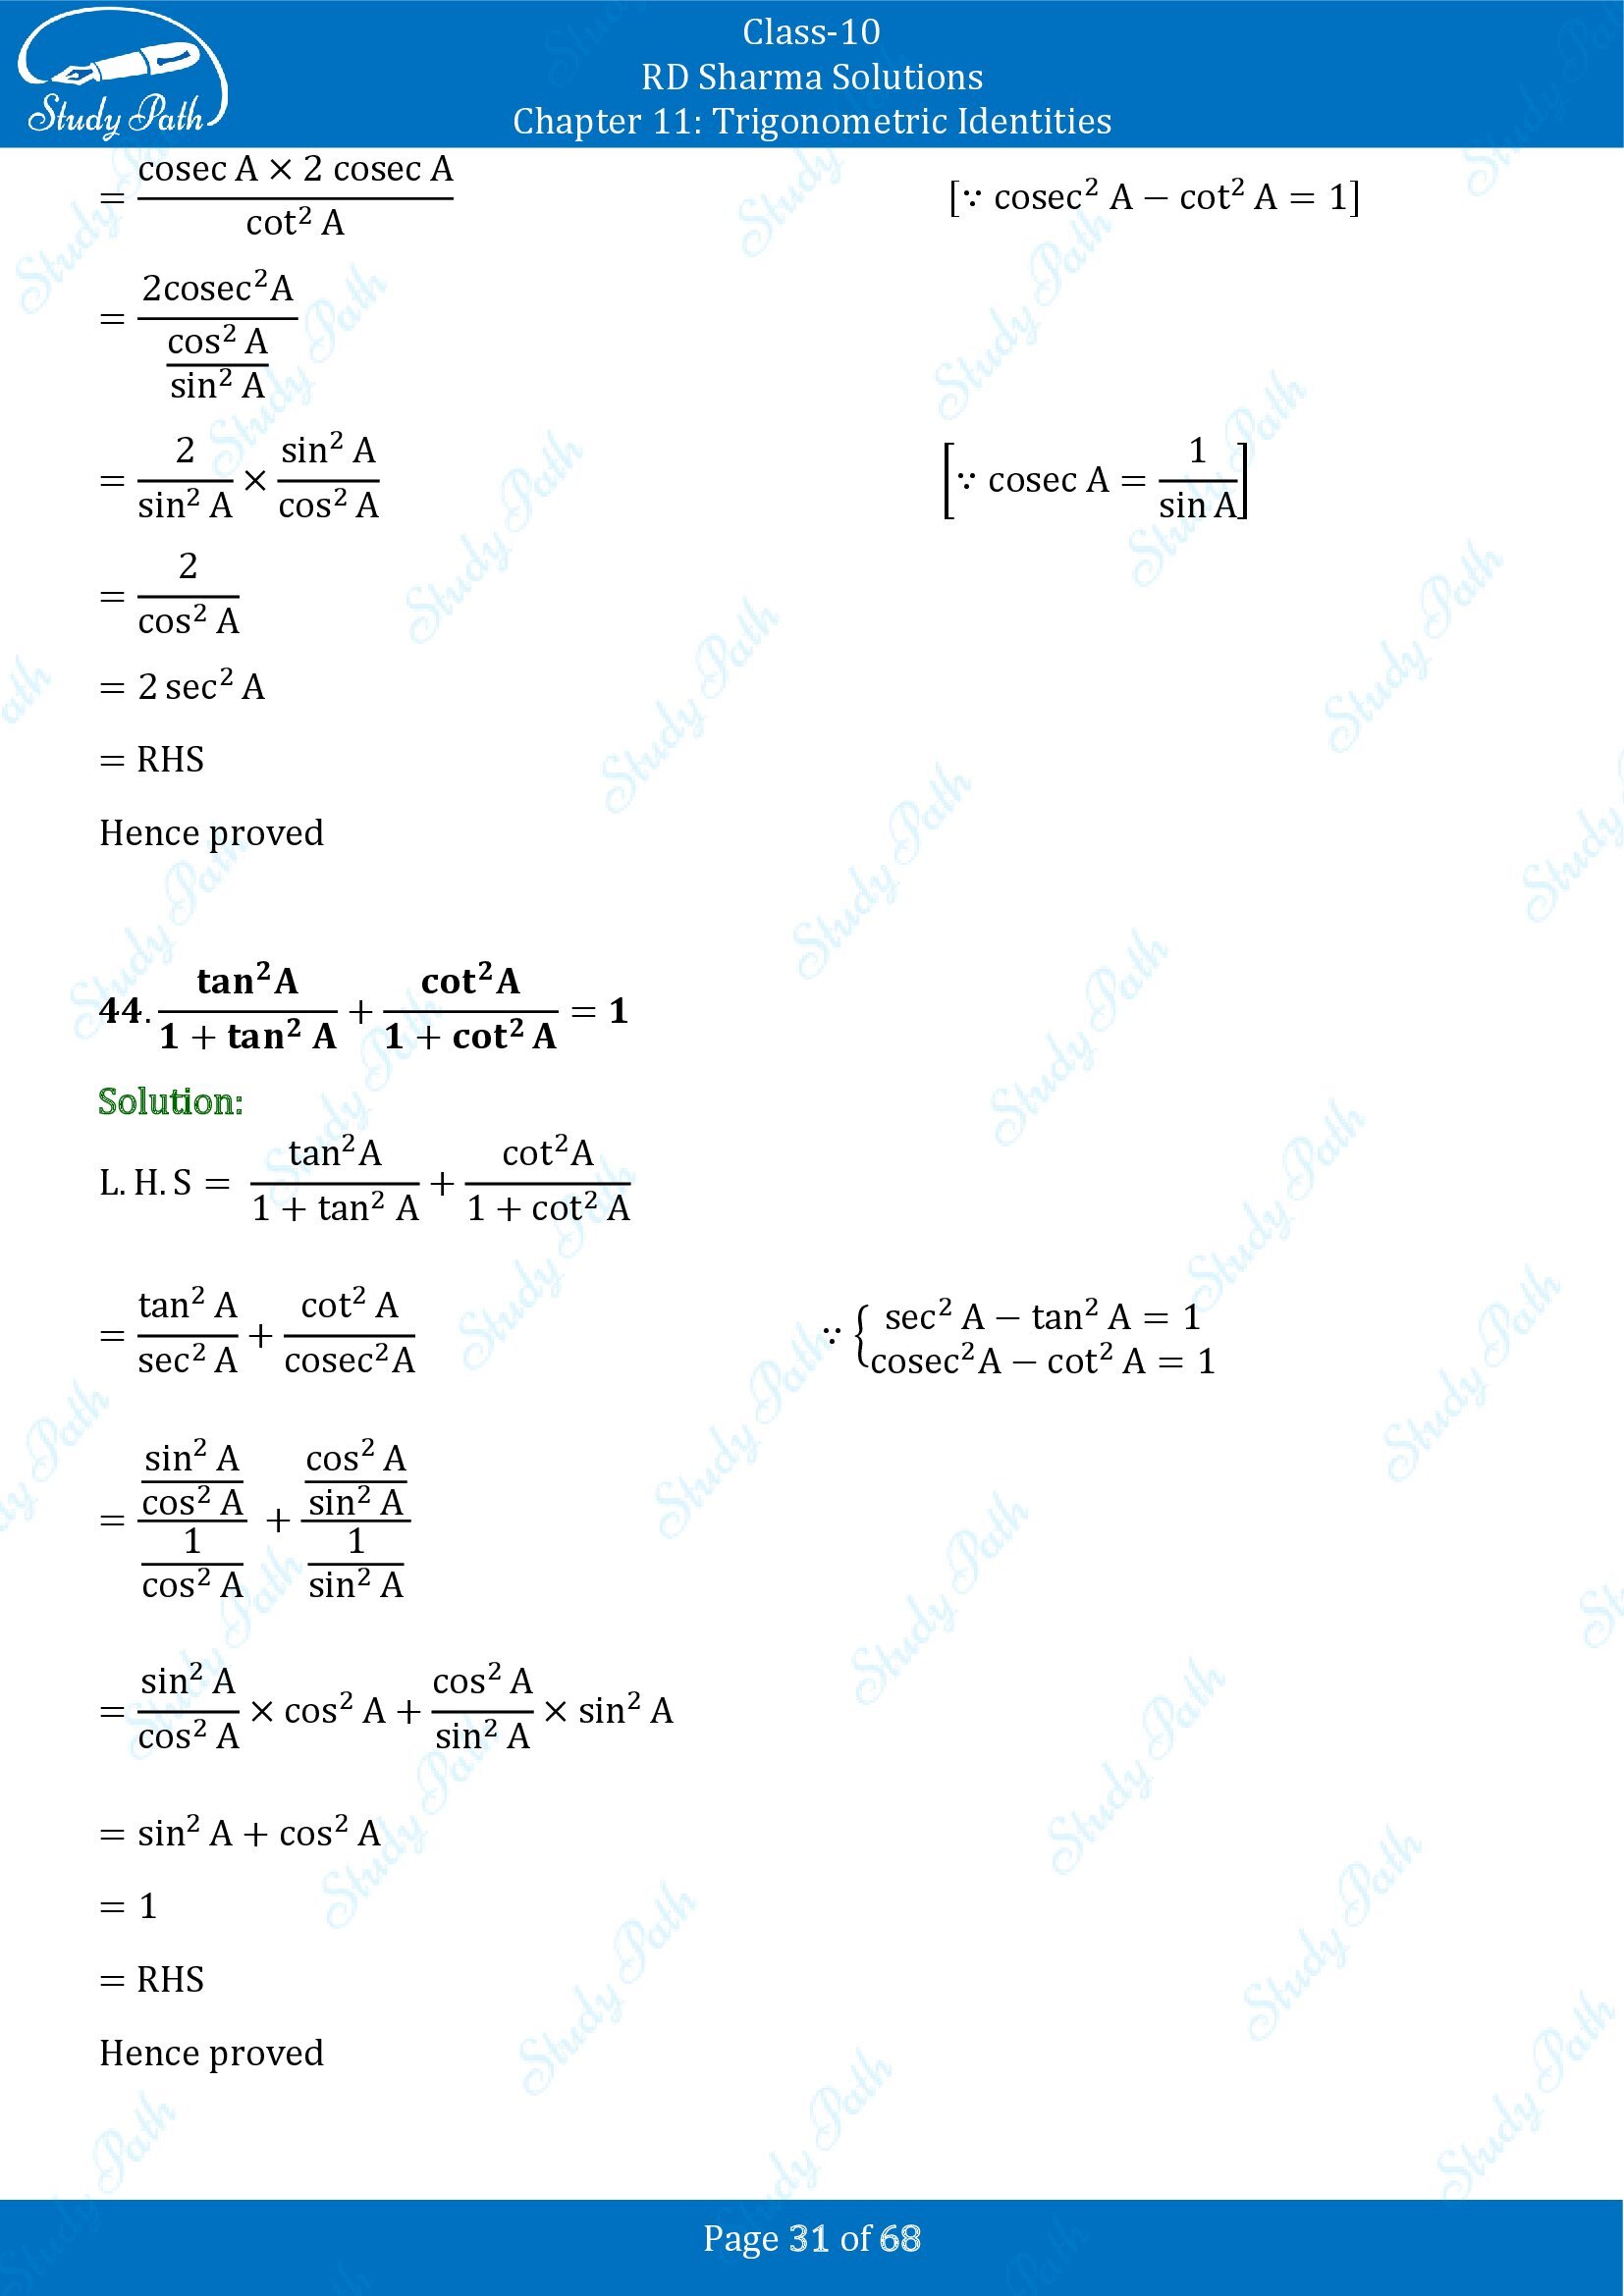 RD Sharma Solutions Class 10 Chapter 11 Trigonometric Identities Exercise 11.1 00031